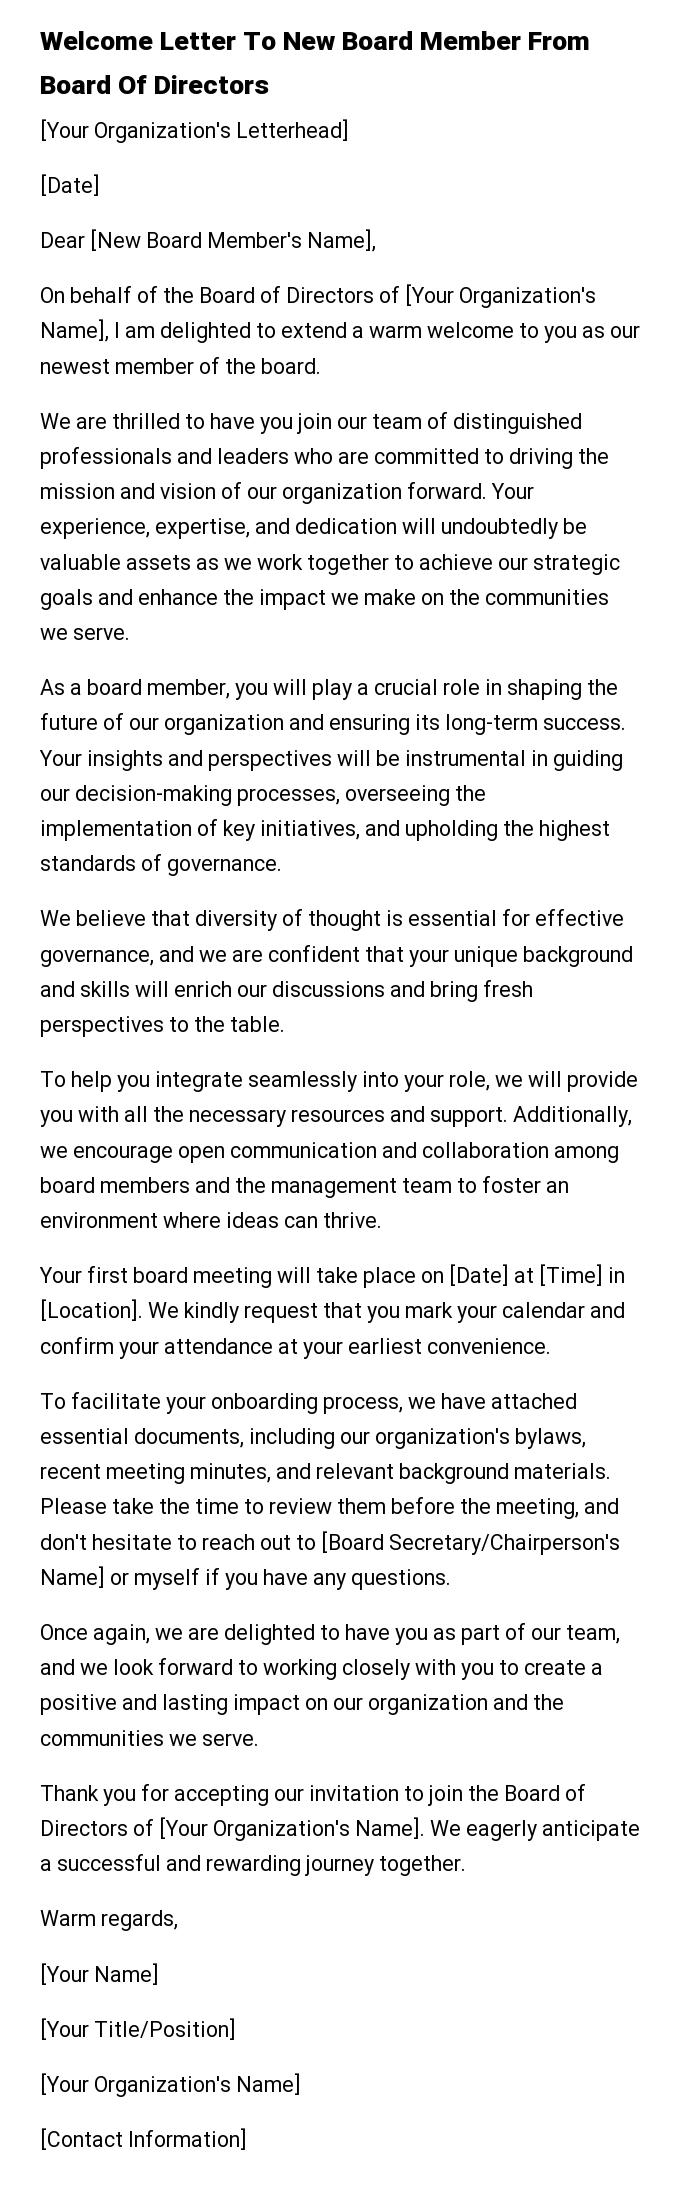 Welcome Letter To New Board Member From Board Of Directors